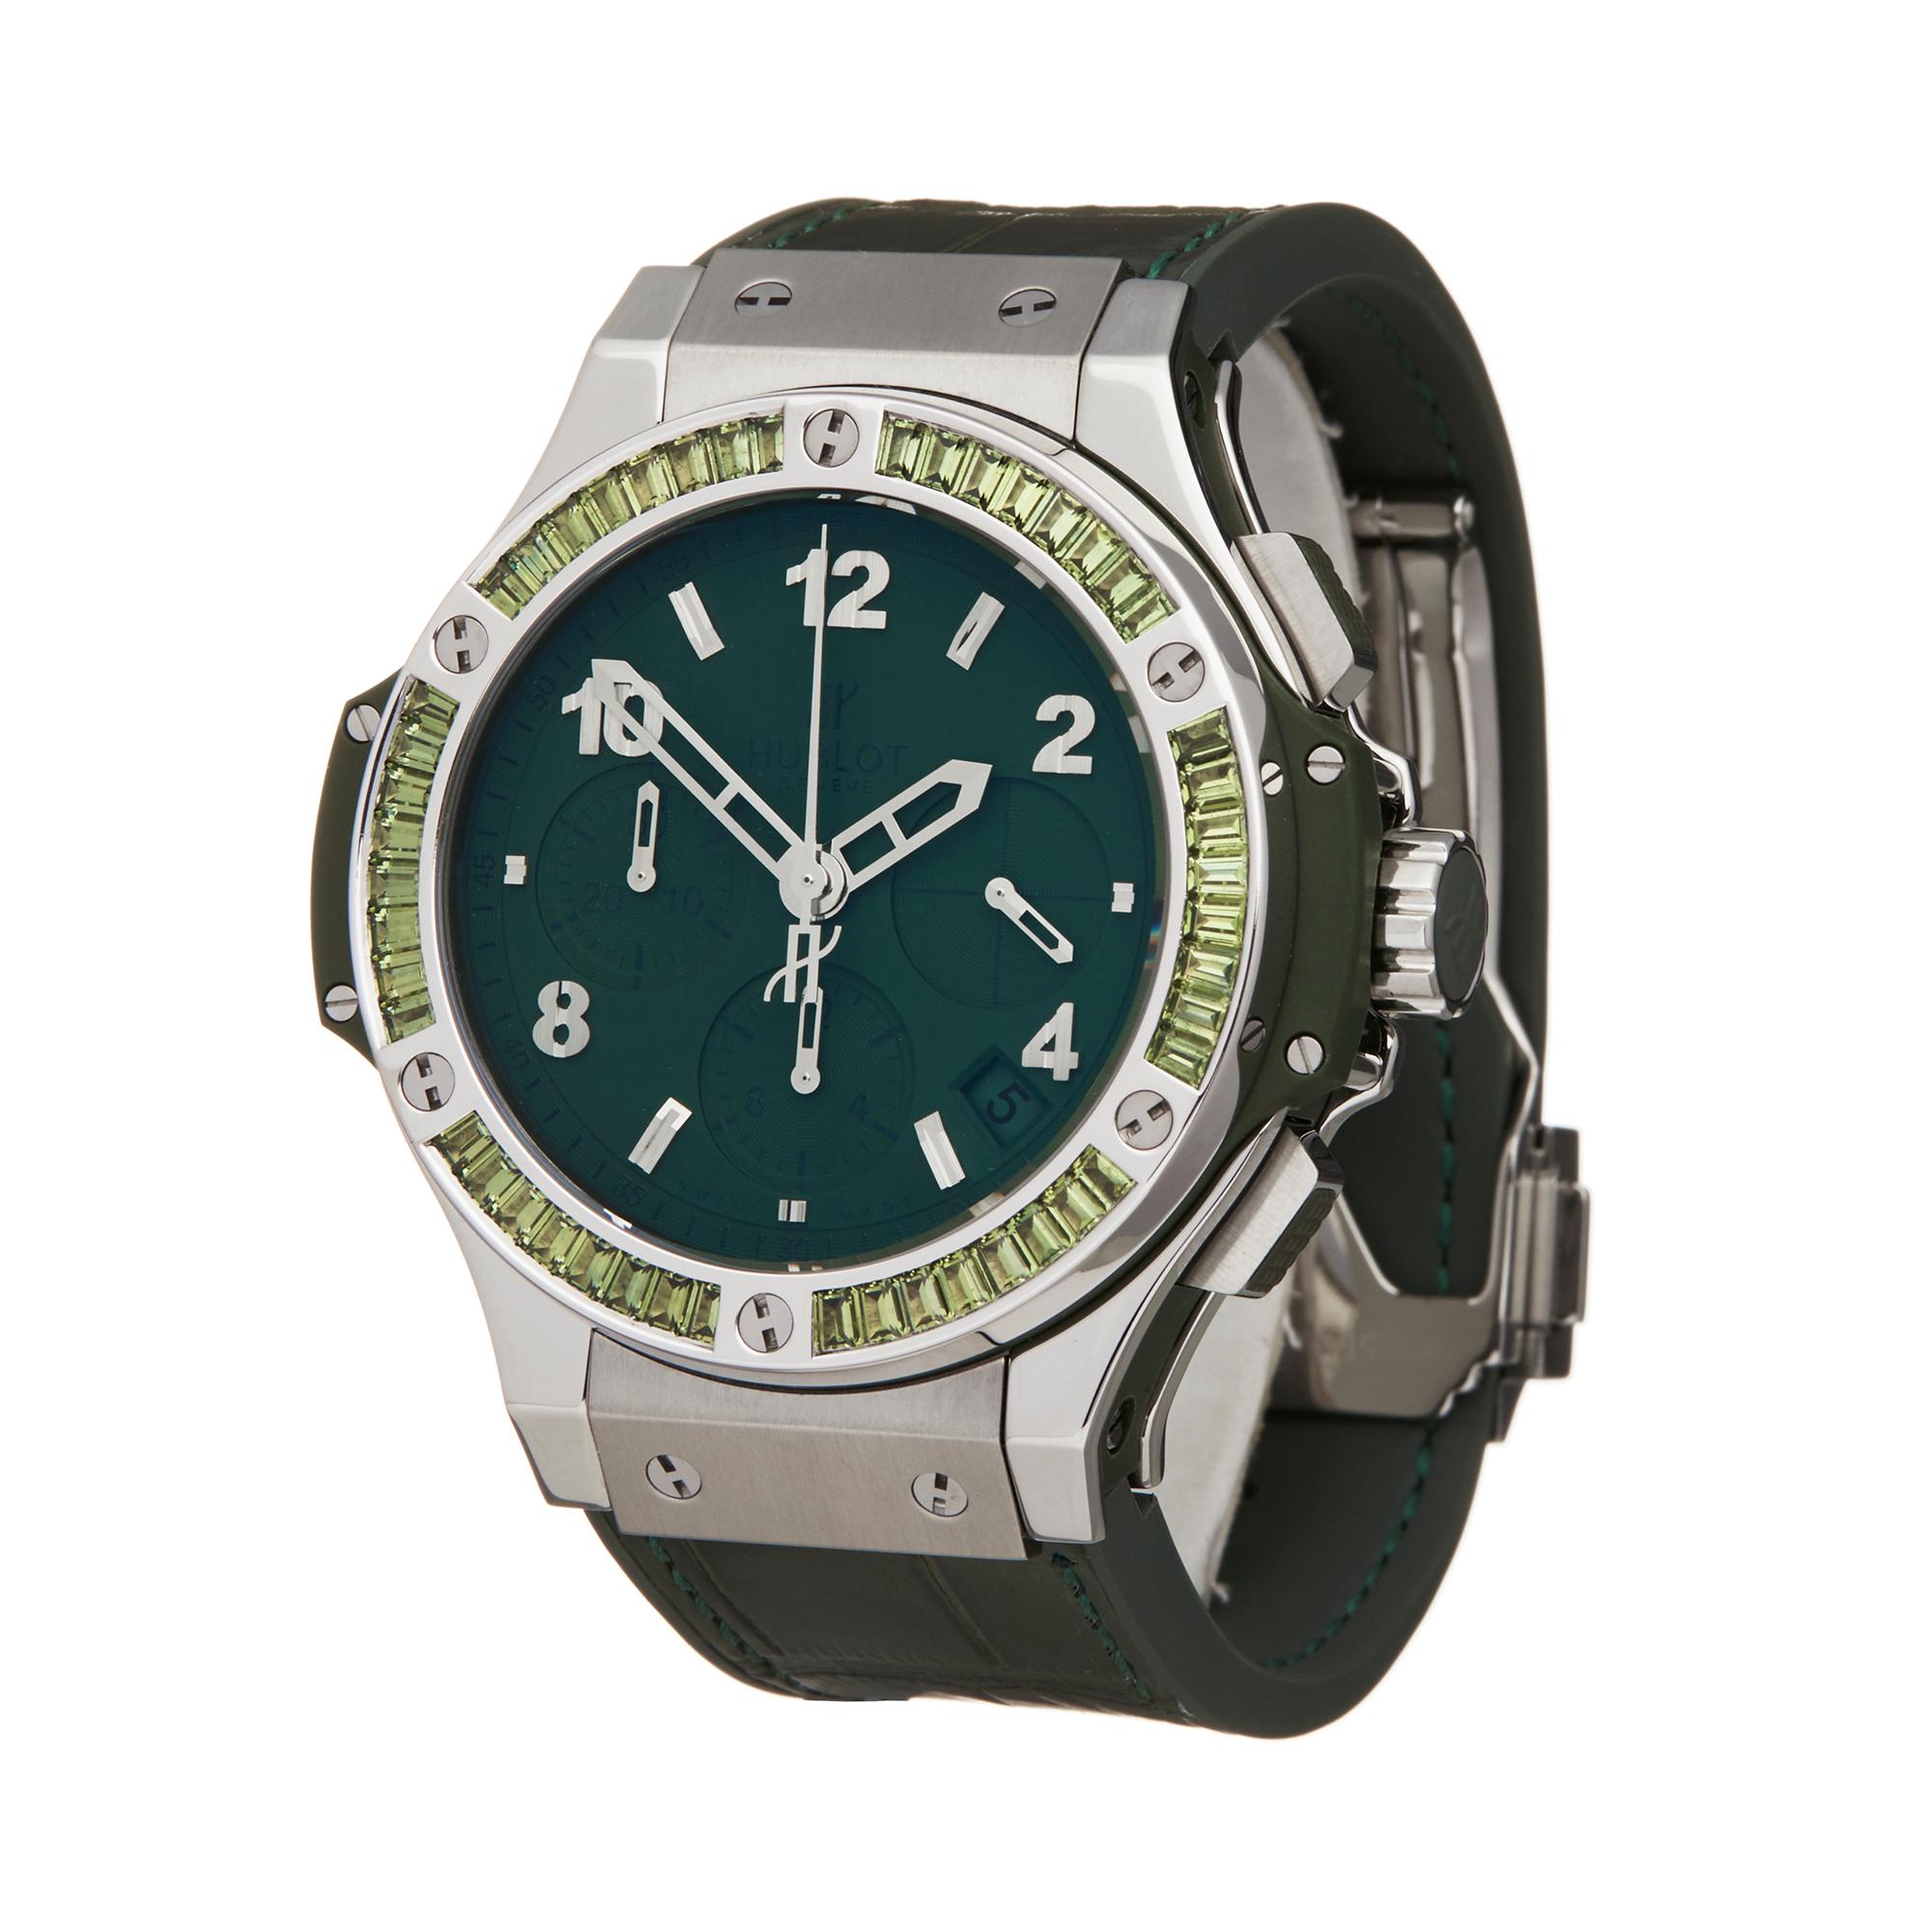 Reference: W5983
Manufacturer: Hublot
Model: Big Bang
Model Reference: 341.SV.5290.LR.1917
Age: Circa 2010's
Gender: Unisex
Box and Papers: Presentation Box, Service Pouch & Service Papers dated 16 April 2019
Dial: Green Arabic
Glass: Sapphire